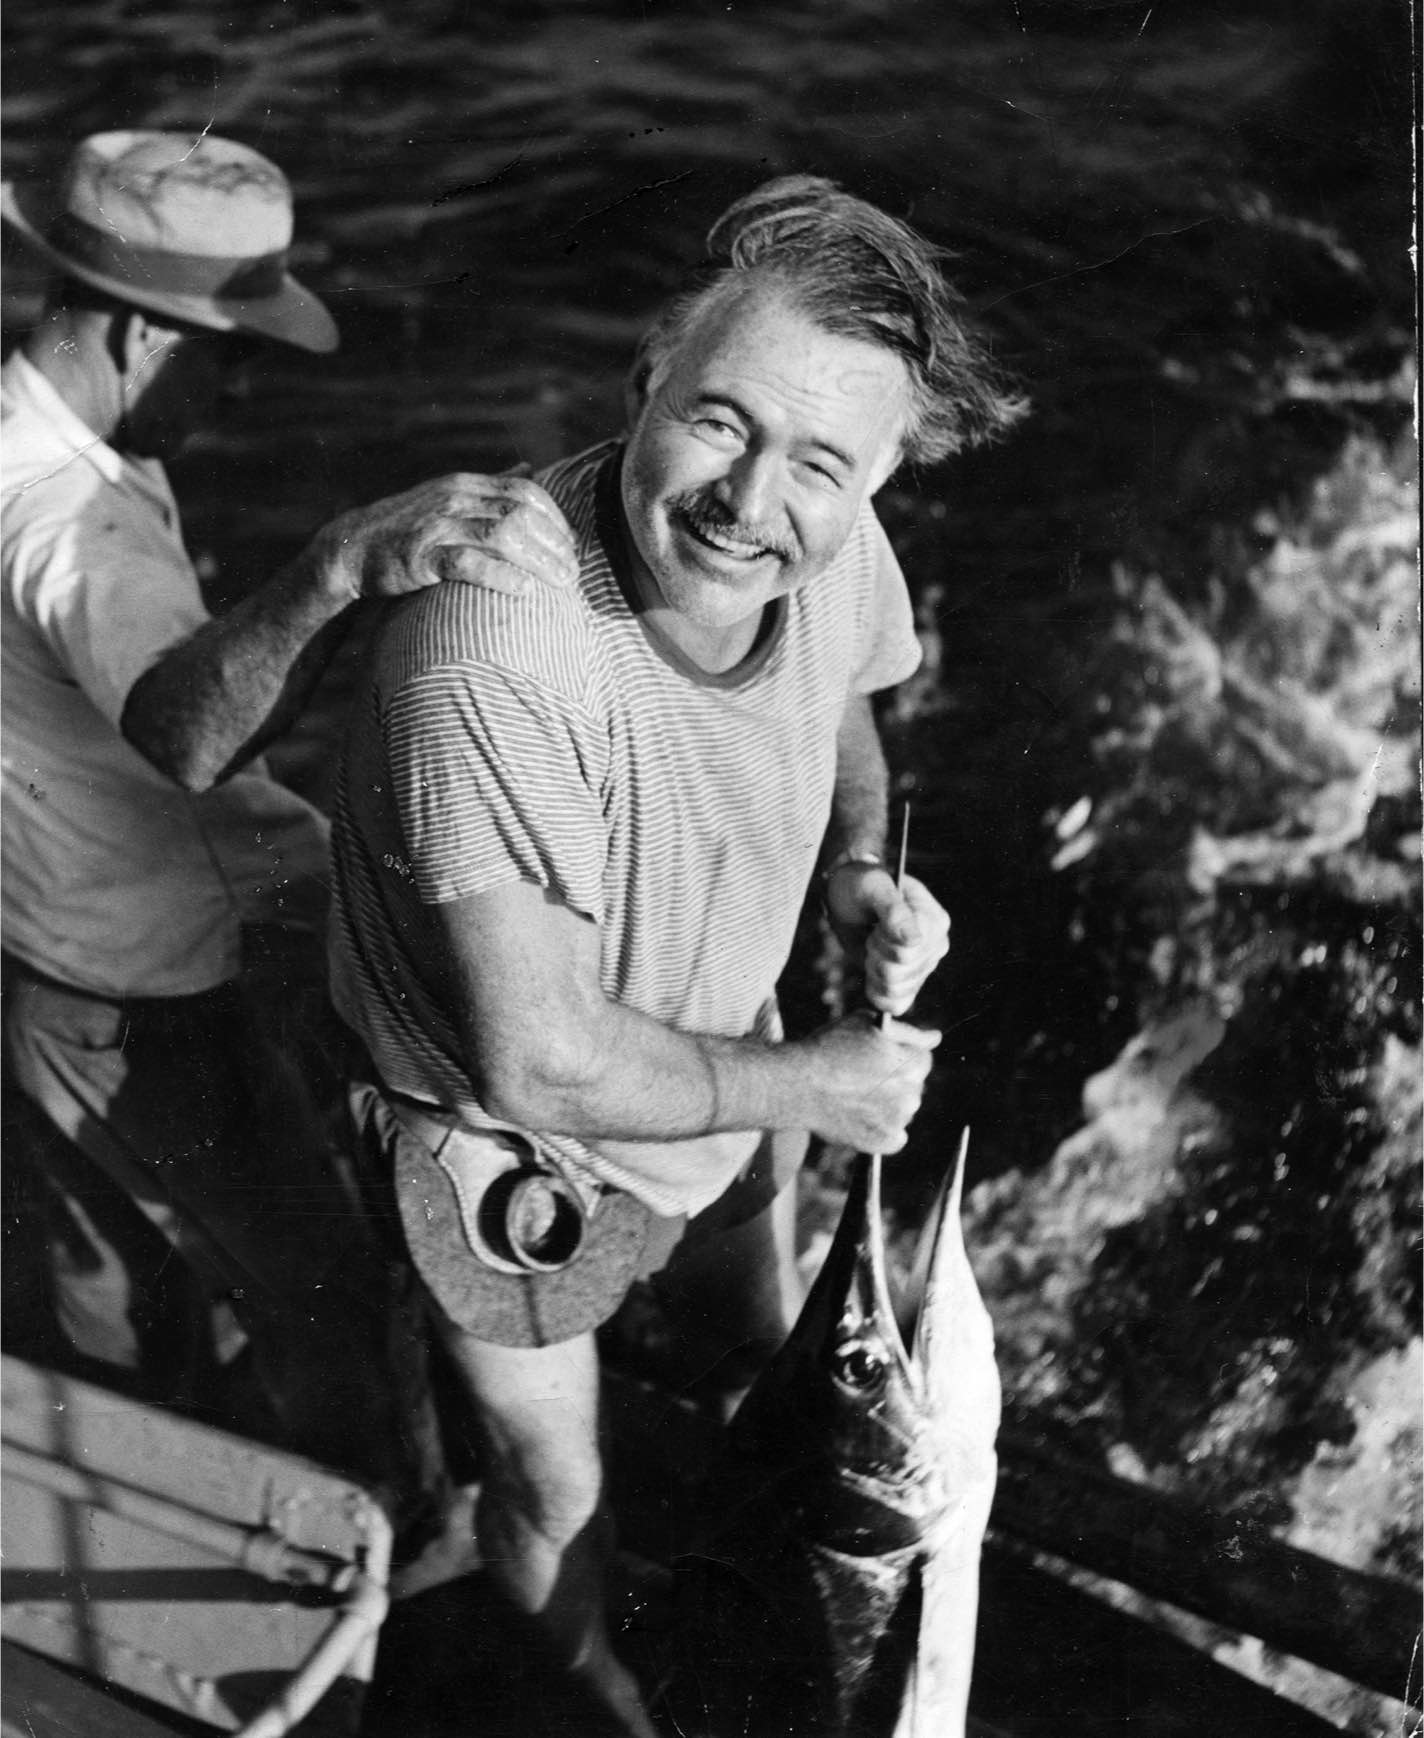           <strong>Fishermans’s Friend</strong><br />          <span            >On his travels in France during the 1920s, Hemingway picked up some            Breton stripe shirts, and wore them for the rest of his life,            especially on fishing expeditions in the Caribbean.</span          >        